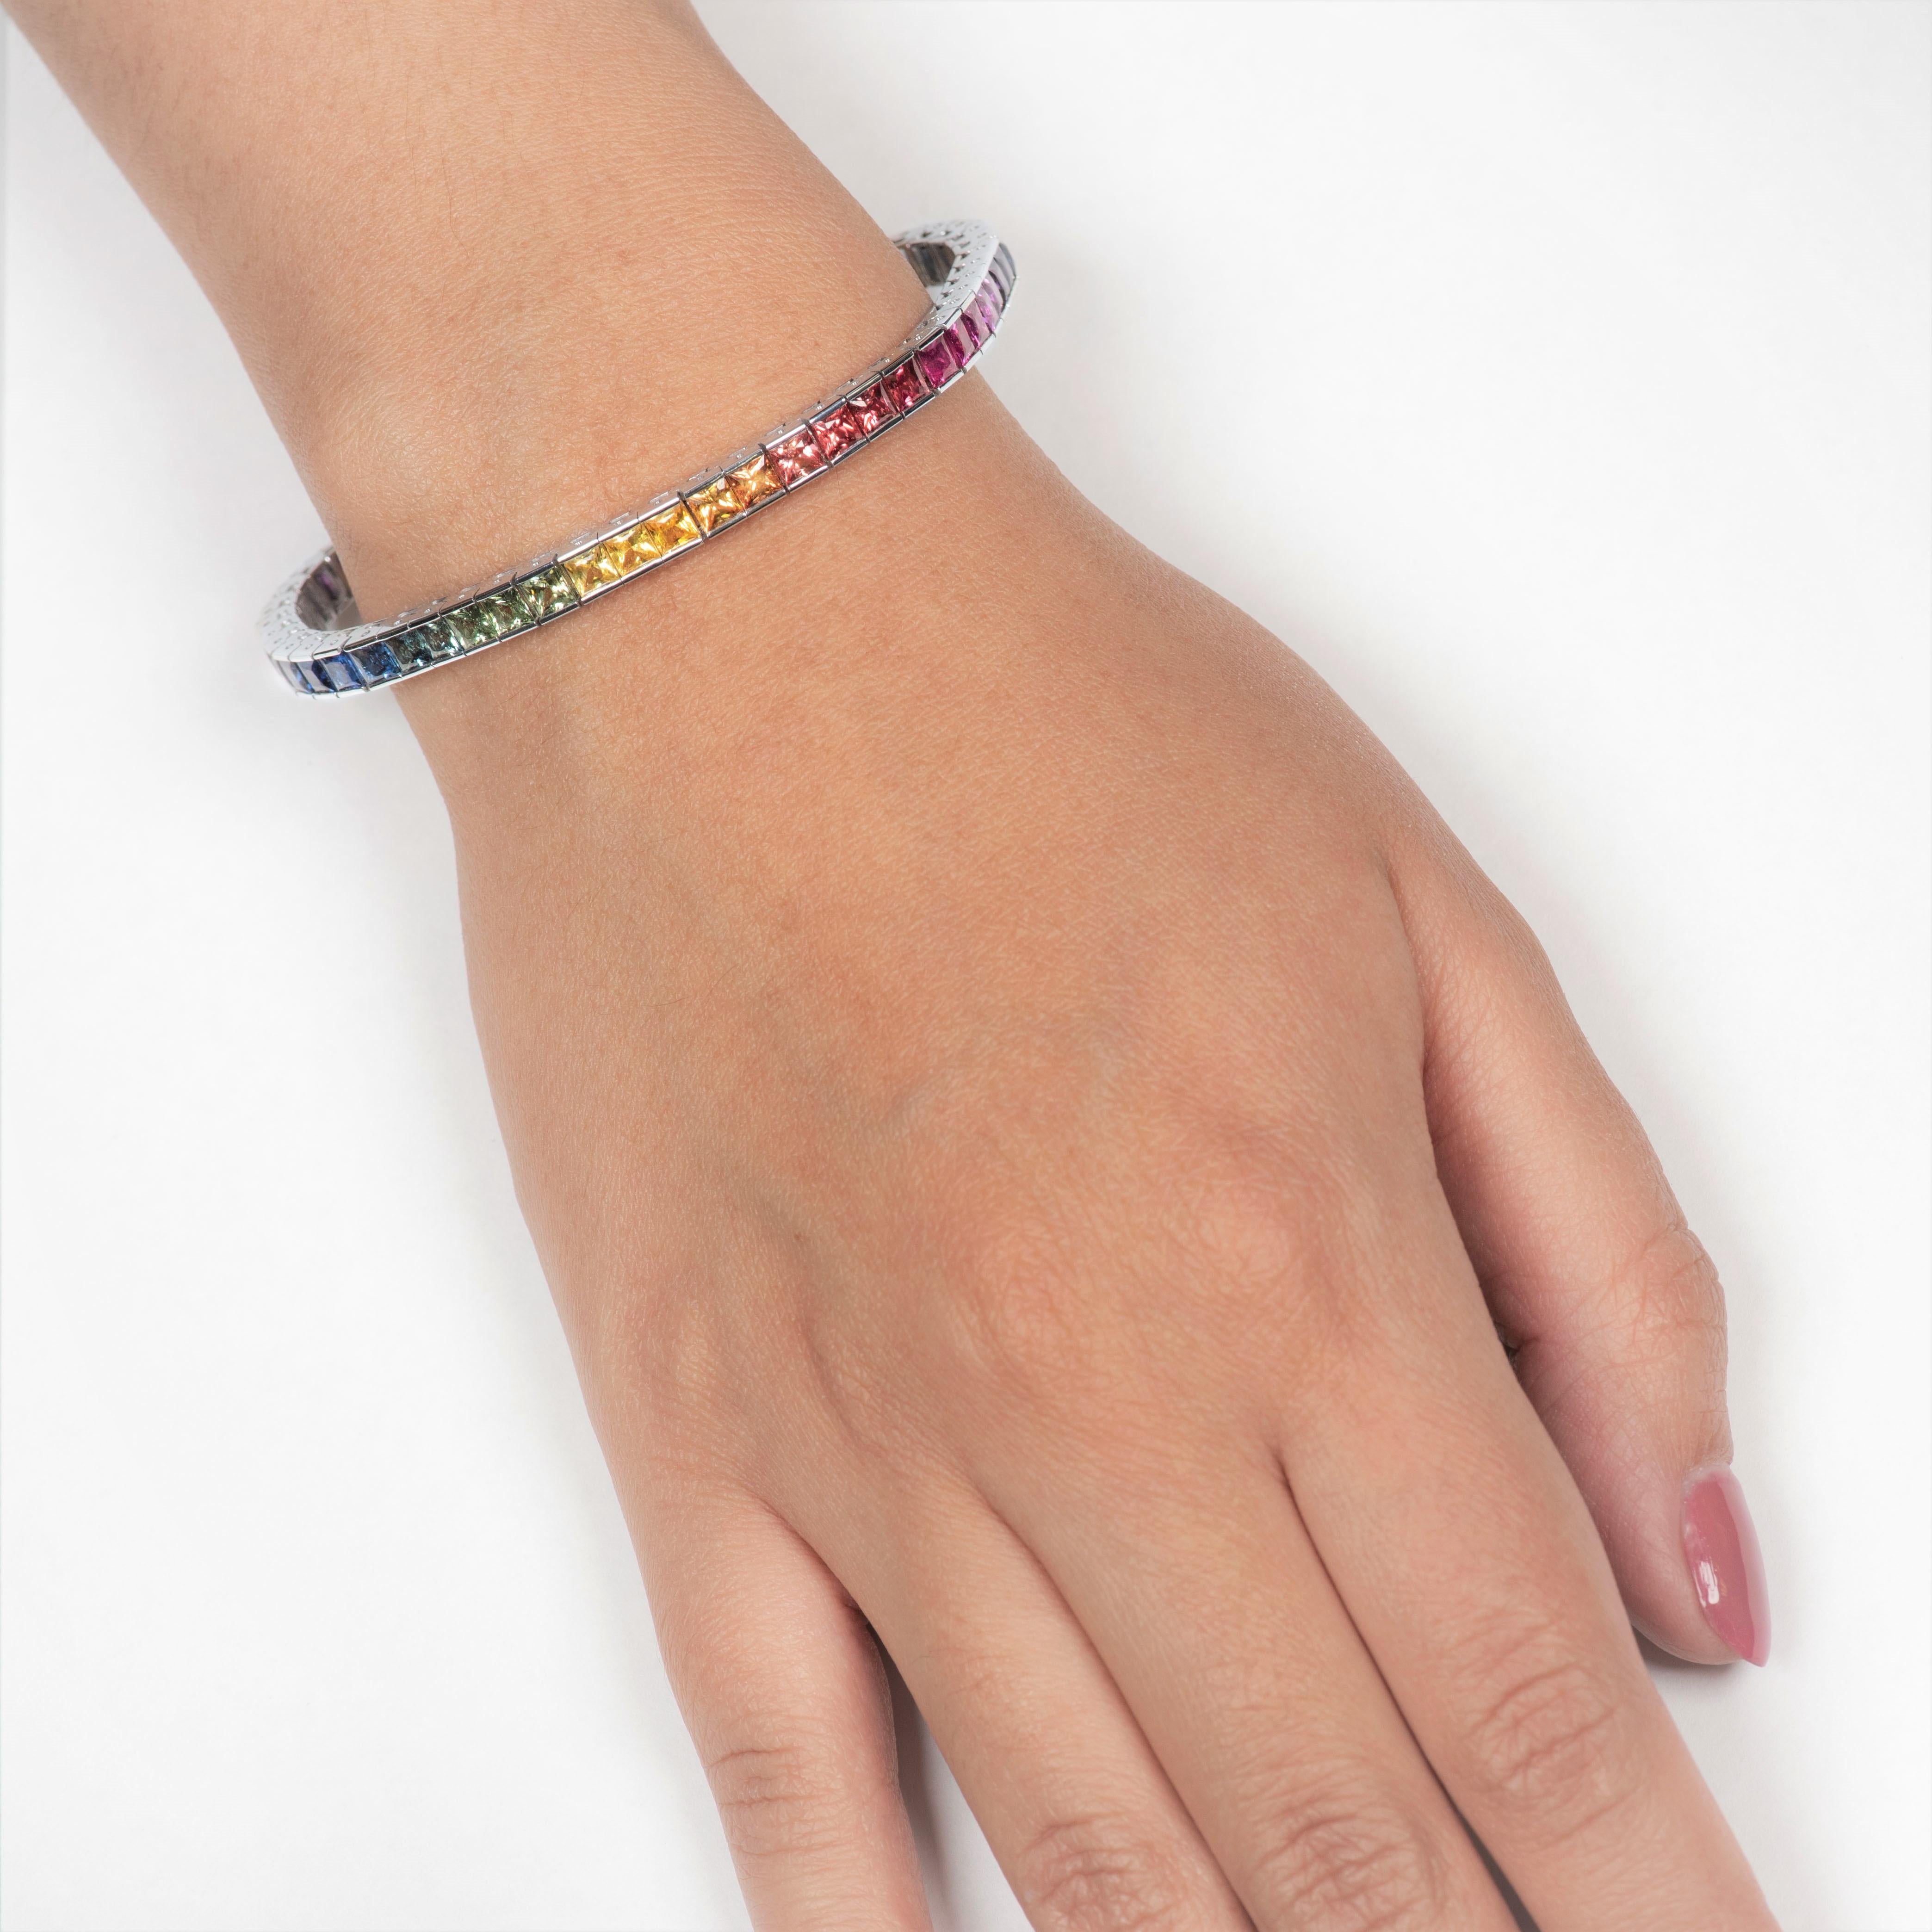 Beautifully in-house crafted channel set 14K white gold tennis bracelet that features 13.27 carats of princess cut rainbow colored sapphires. This piece is an absolute favorite as it presents 50 different colors of hue and tones of multi-colored